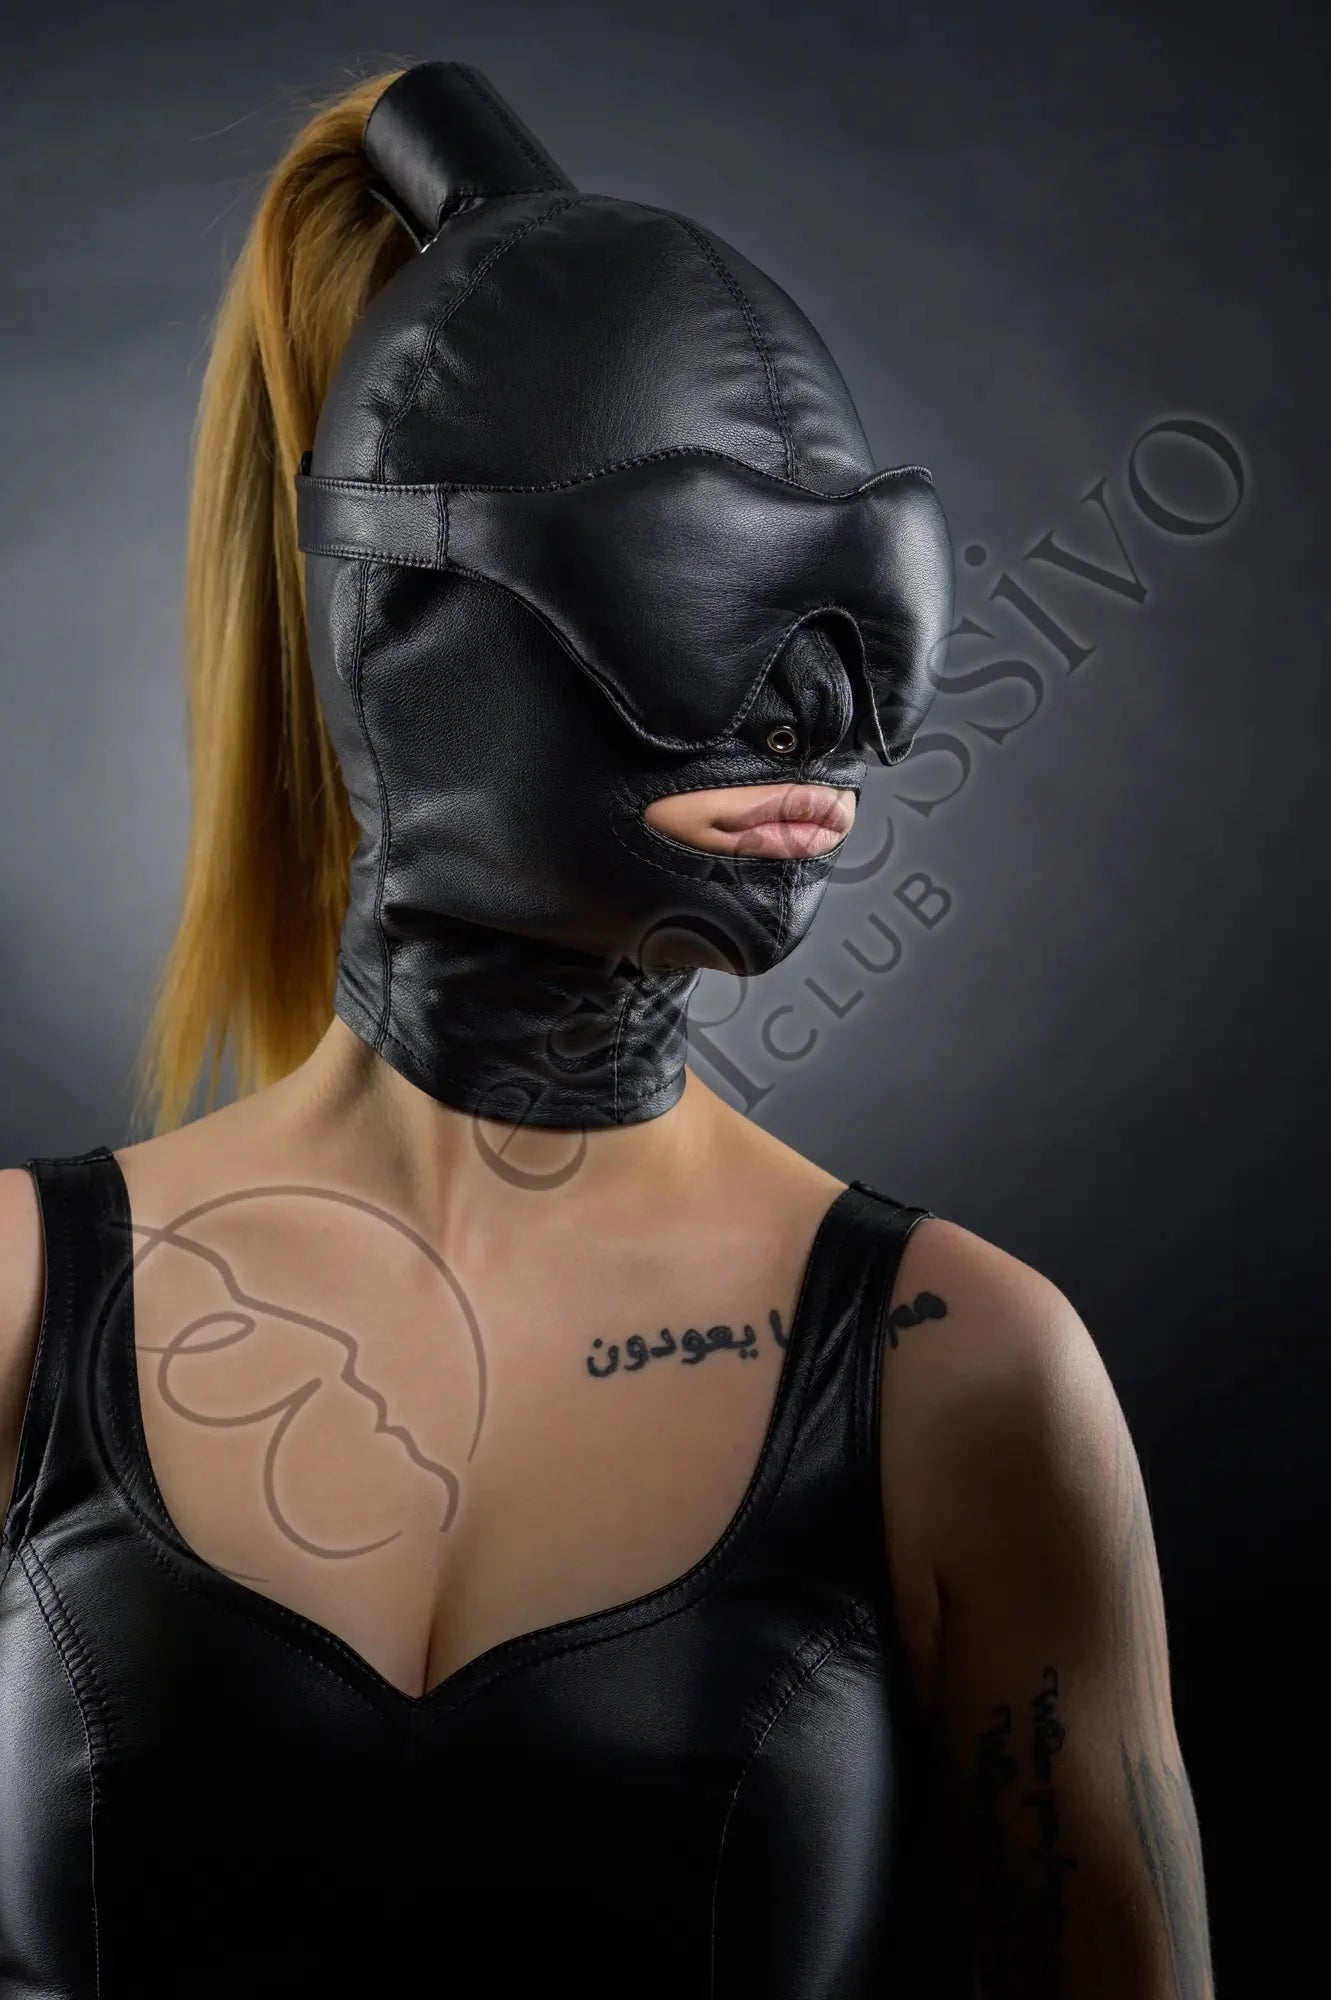 Real Leather Bondage Set of BDSM Tight Ponytail Hood with Leather Blindfold and Muffle Gag